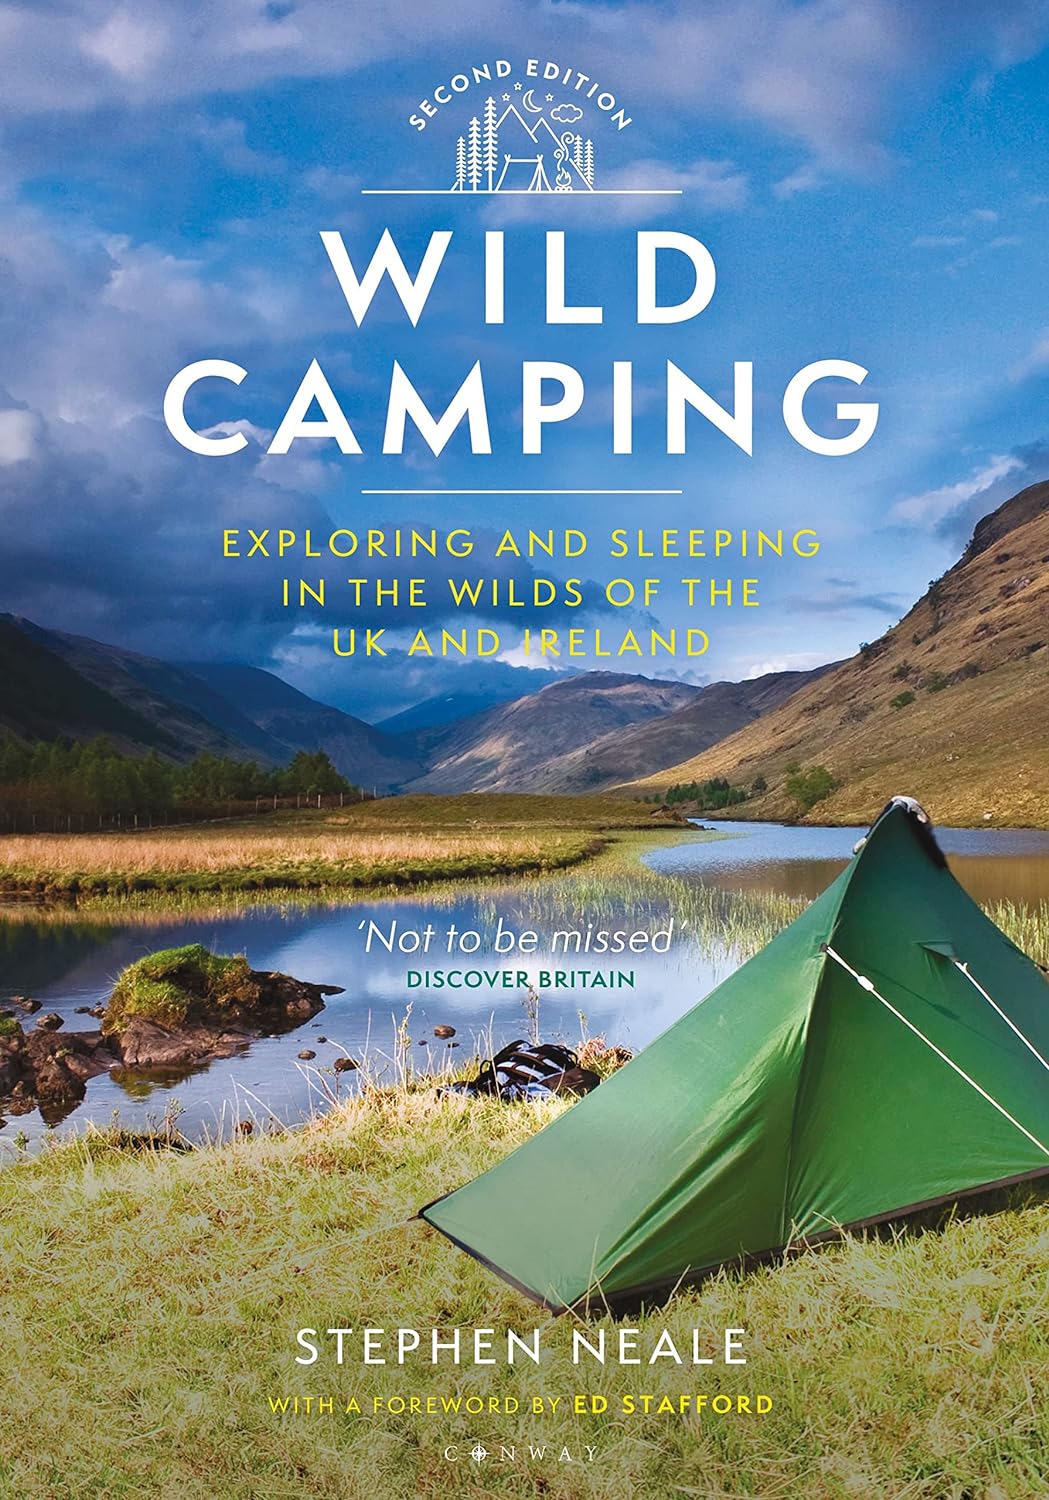 Wild Camping: Exploring and Sleeping in the Wilds of the UK and Ireland     Paperback – 2 April 2020